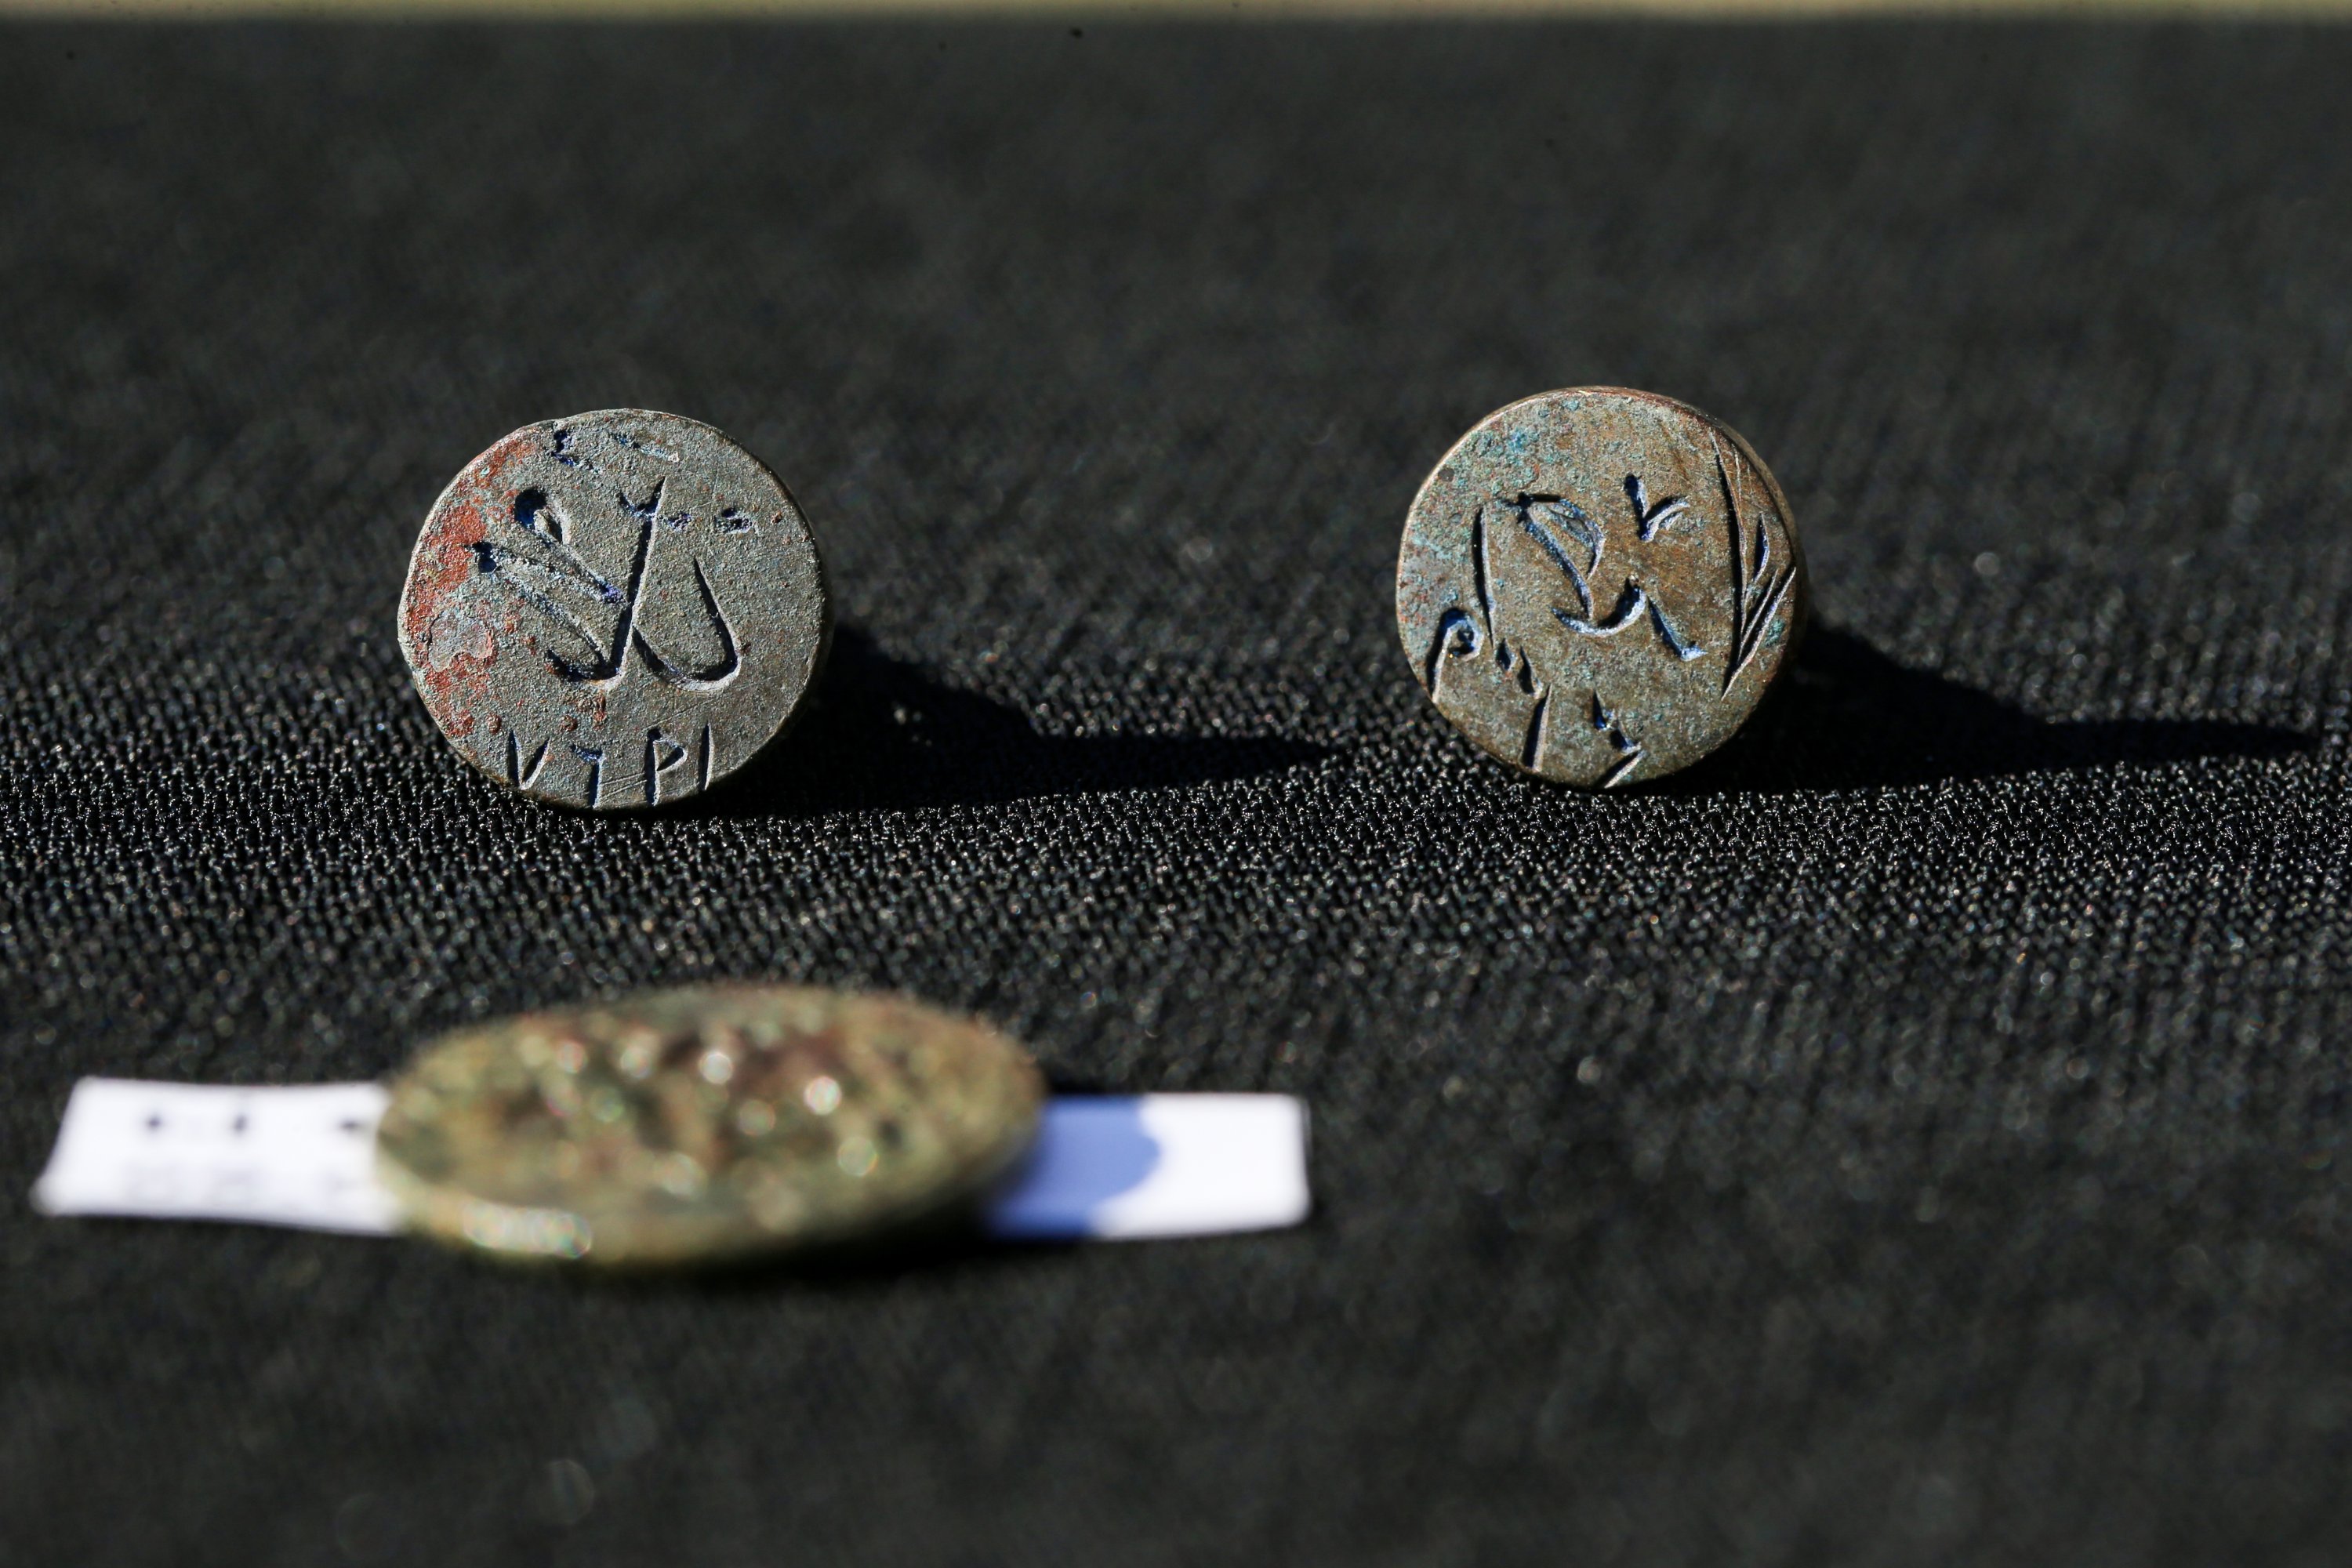 Several coins minted during the Aq Qoyunlu, Artuqid and Ottoman periods have been discovered at Amida Mound in Diyarbakır, southeastern Turkey, Jan. 4, 2021. (AA Photo)